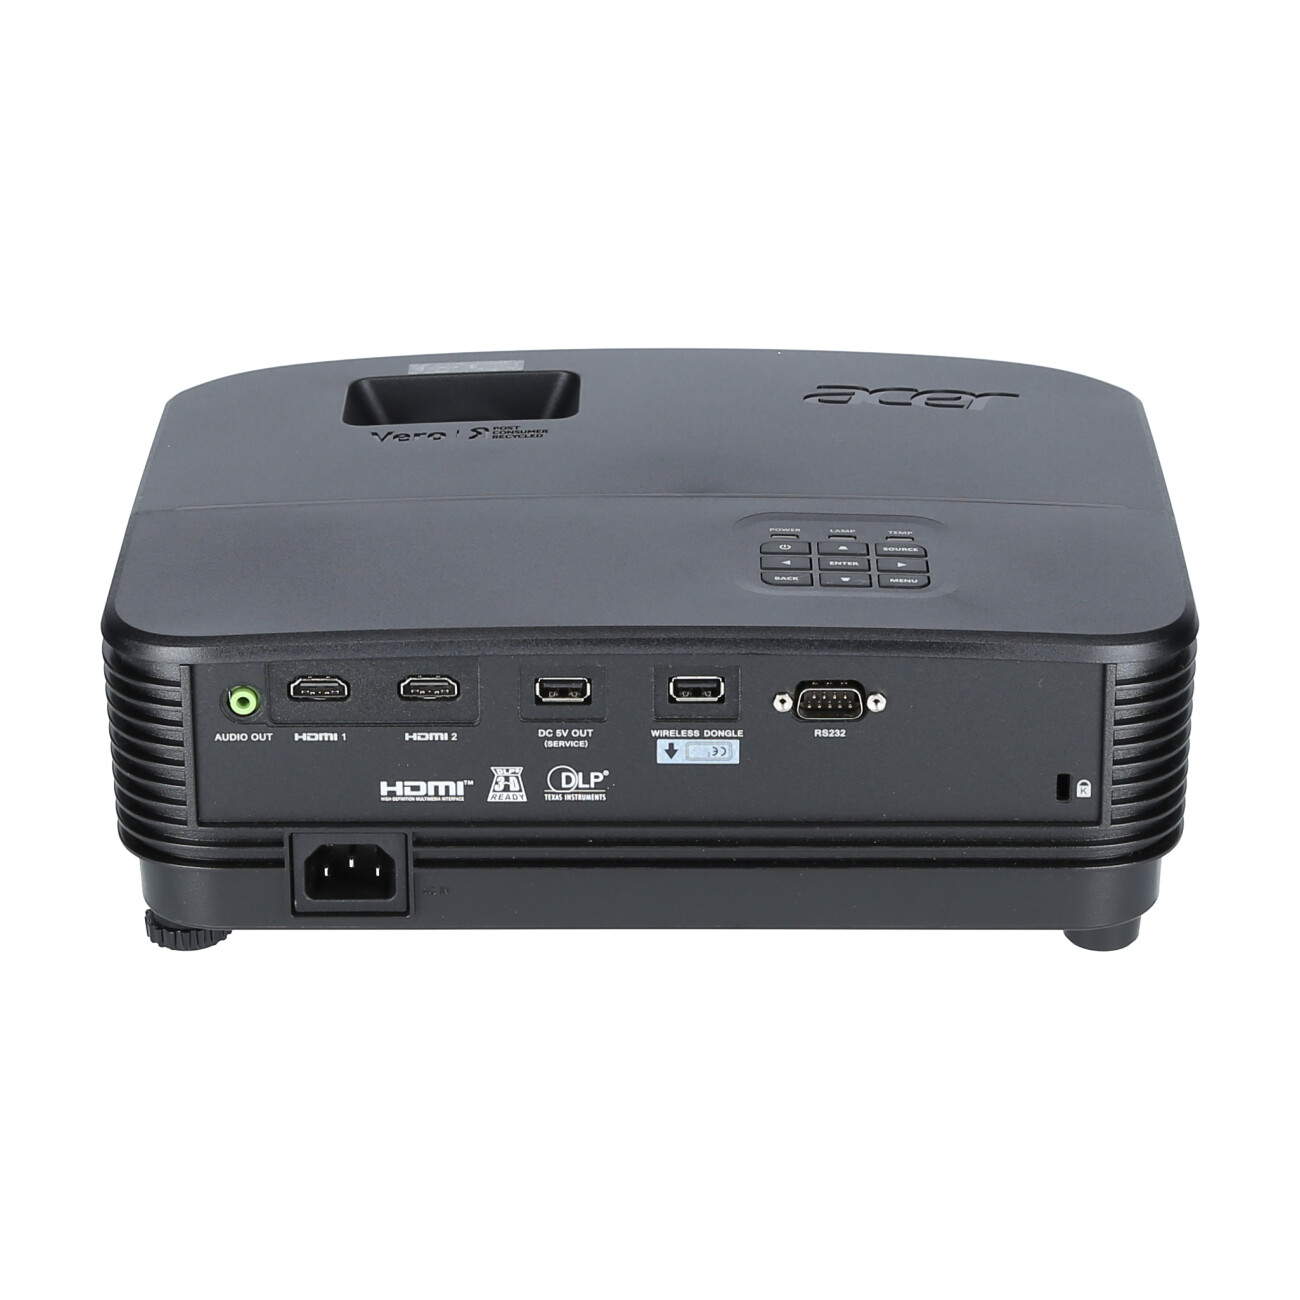 Acer-Vero-PD2527i-Full-HD-Business-Projector